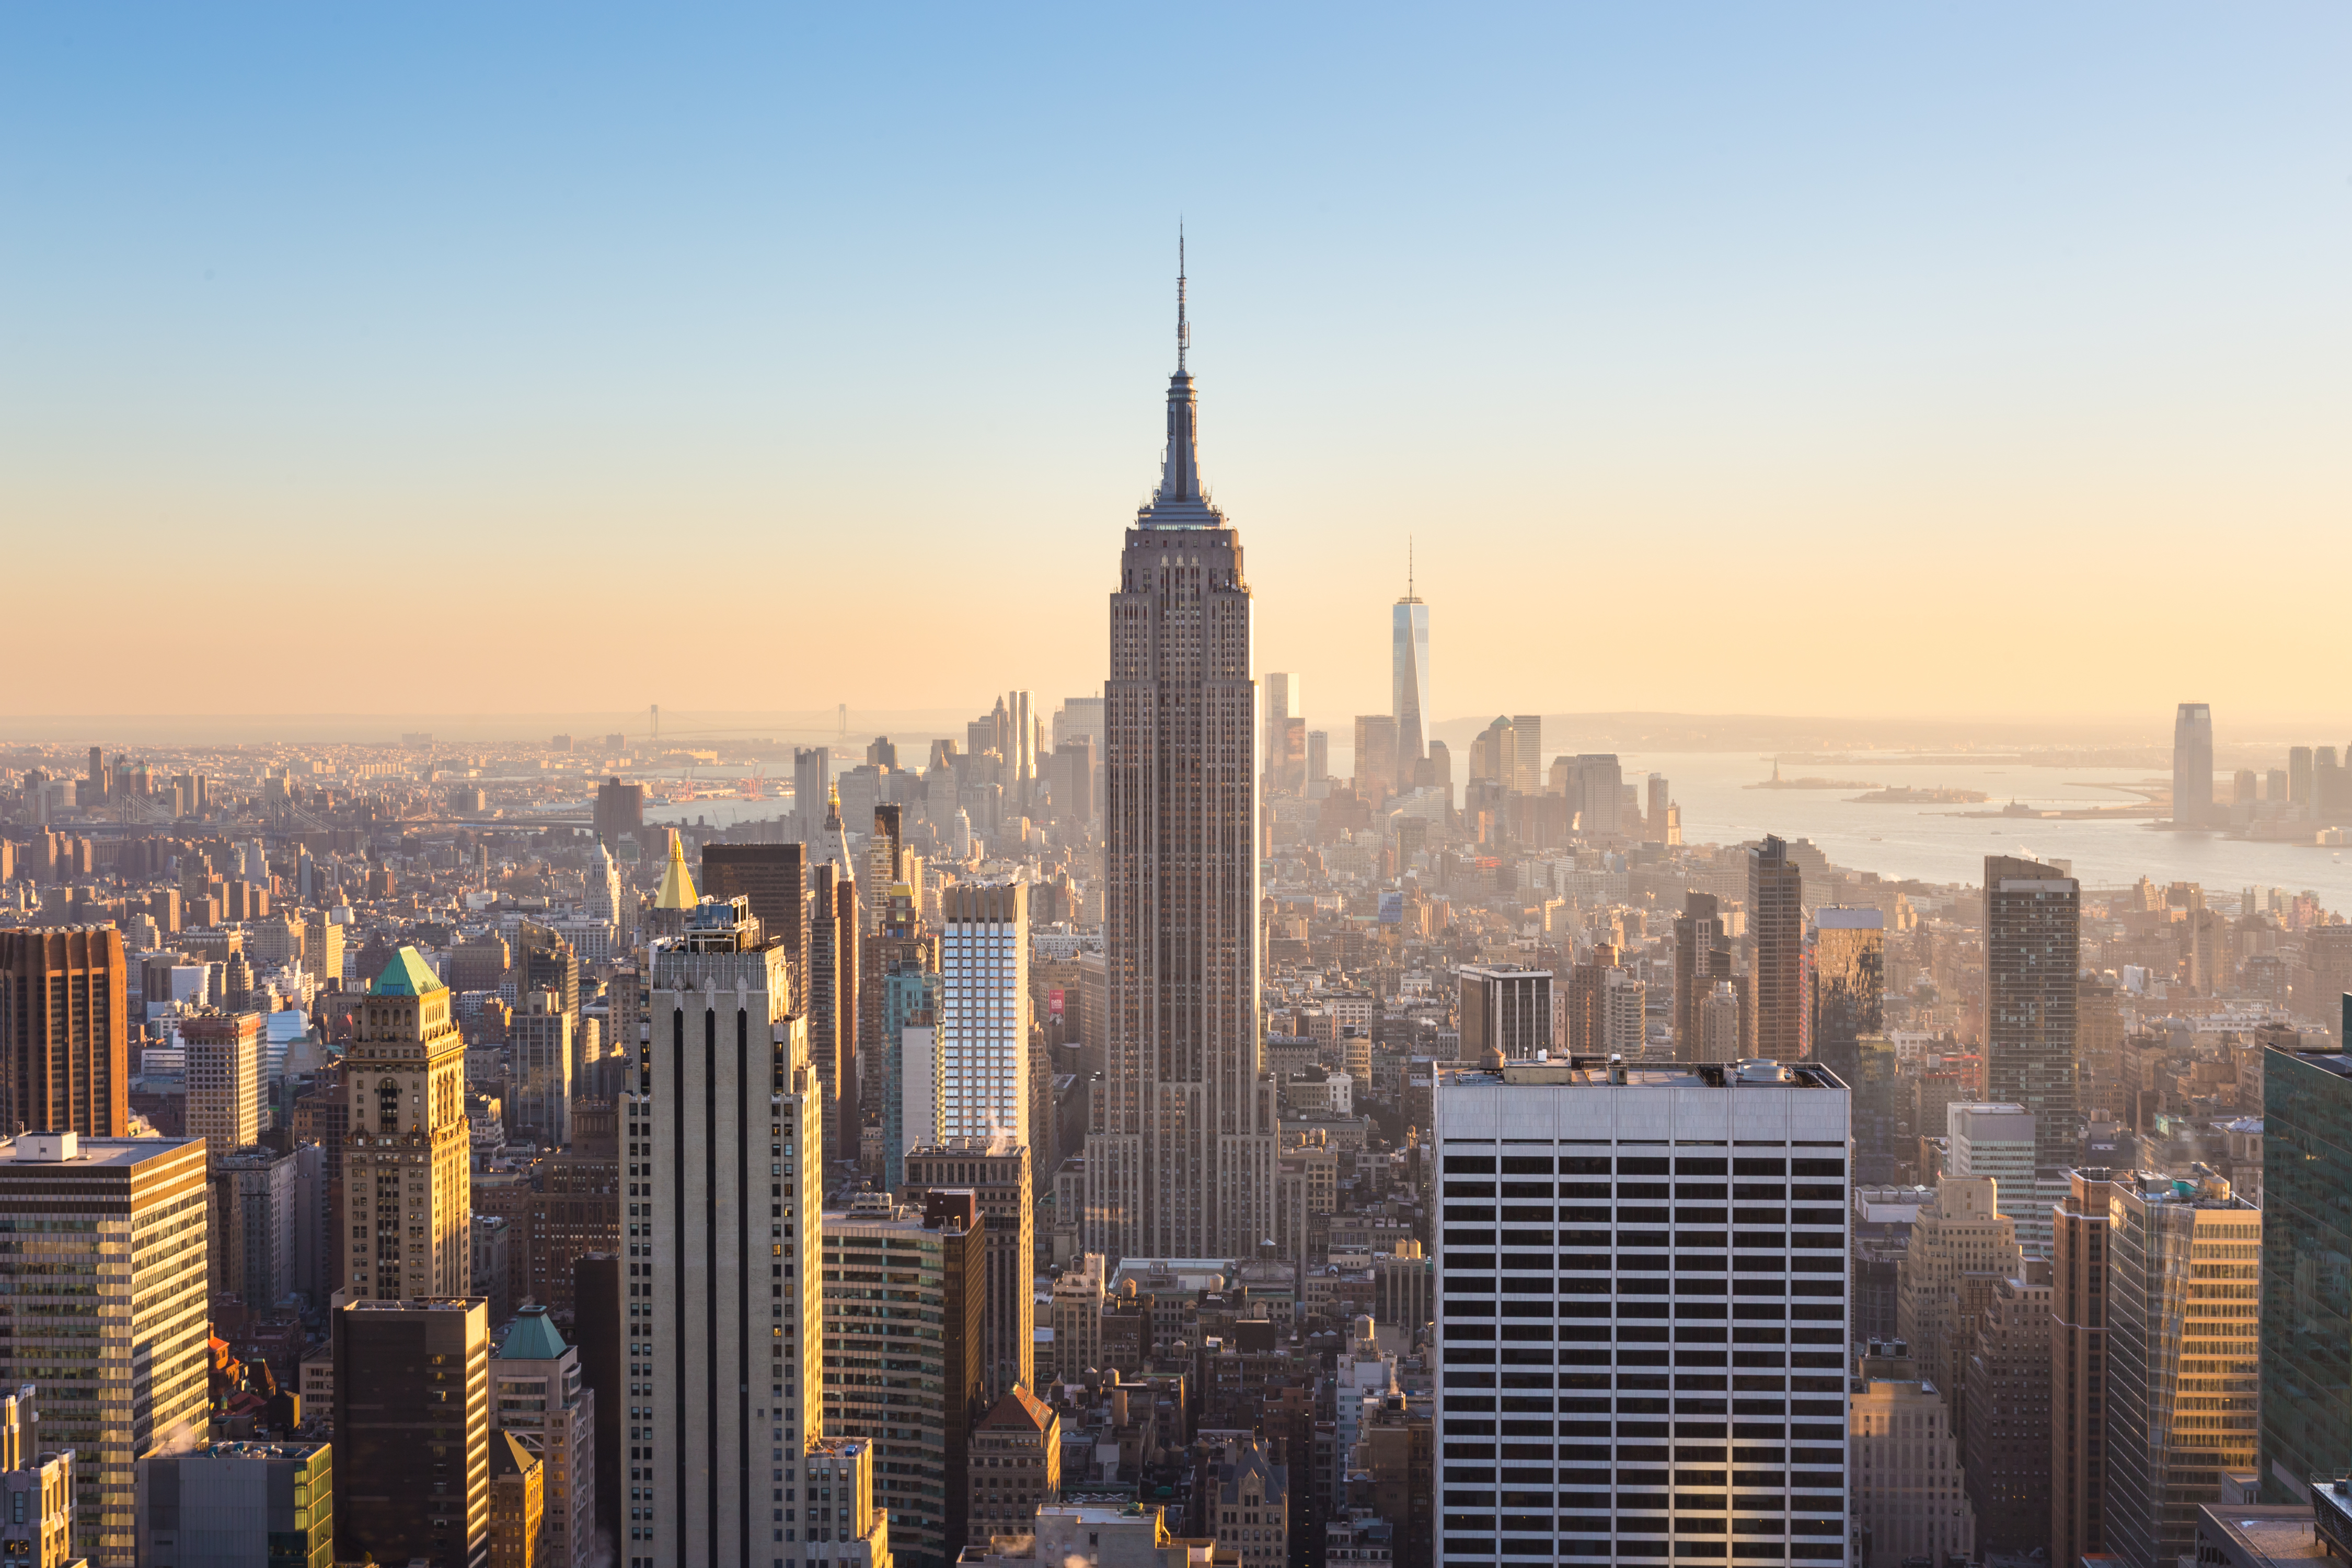 Discover the wonderful Midtown district in 10km! This route offers a healthy mix of trees, trade and entertainment, passing by Central Park, the Empire State Building, Madison Square Garden and much more!